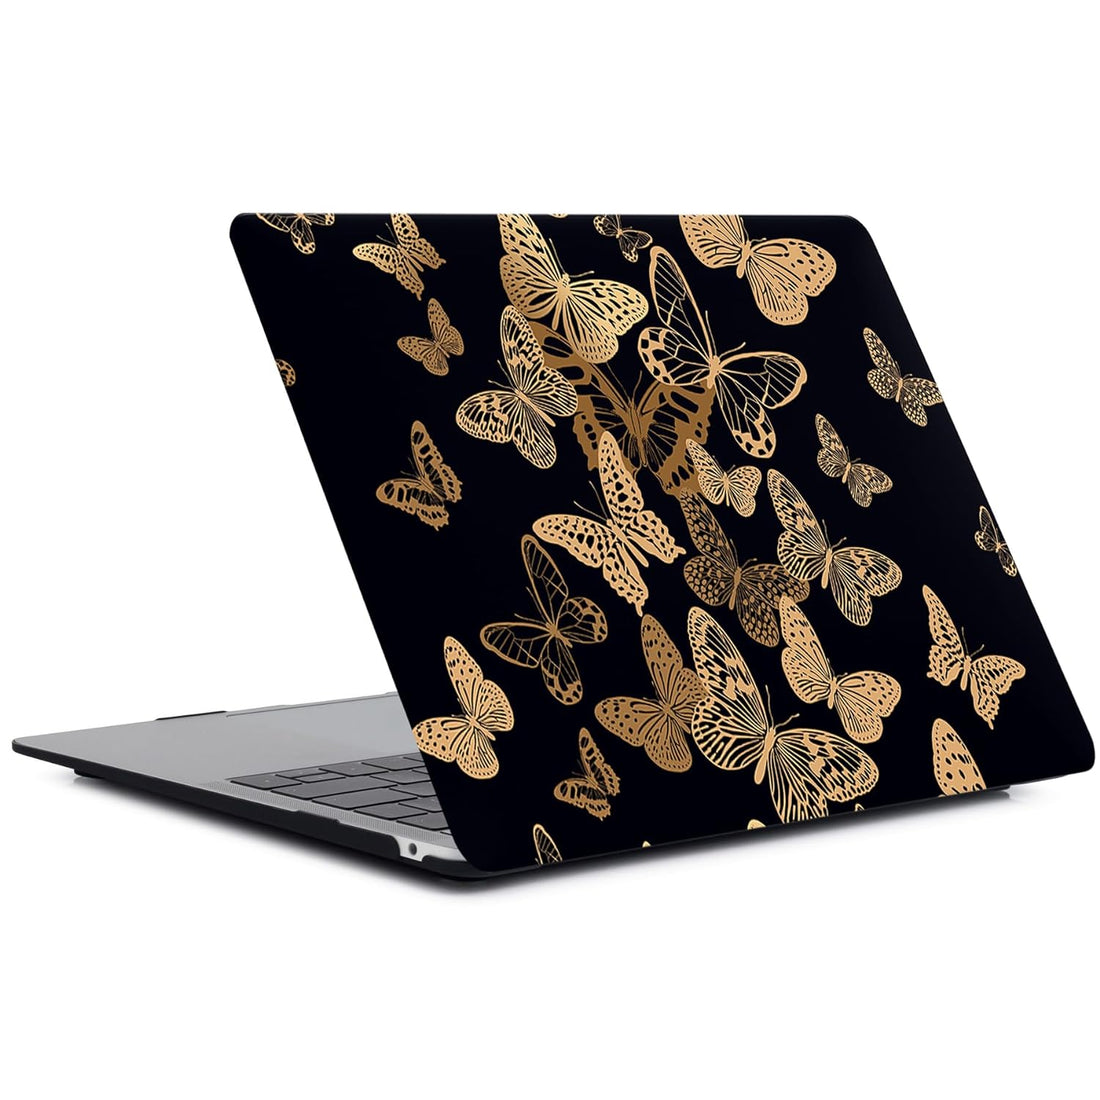 Laptop Case Compatible with MacBook Air 13 Inch Case 2020 2019 2018 Release Model A2337 A2179 A1932 with Retina Display & Touch ID, Plastic Hard Shell Cover & Keyboard Cover Skin, Gold Butterfly